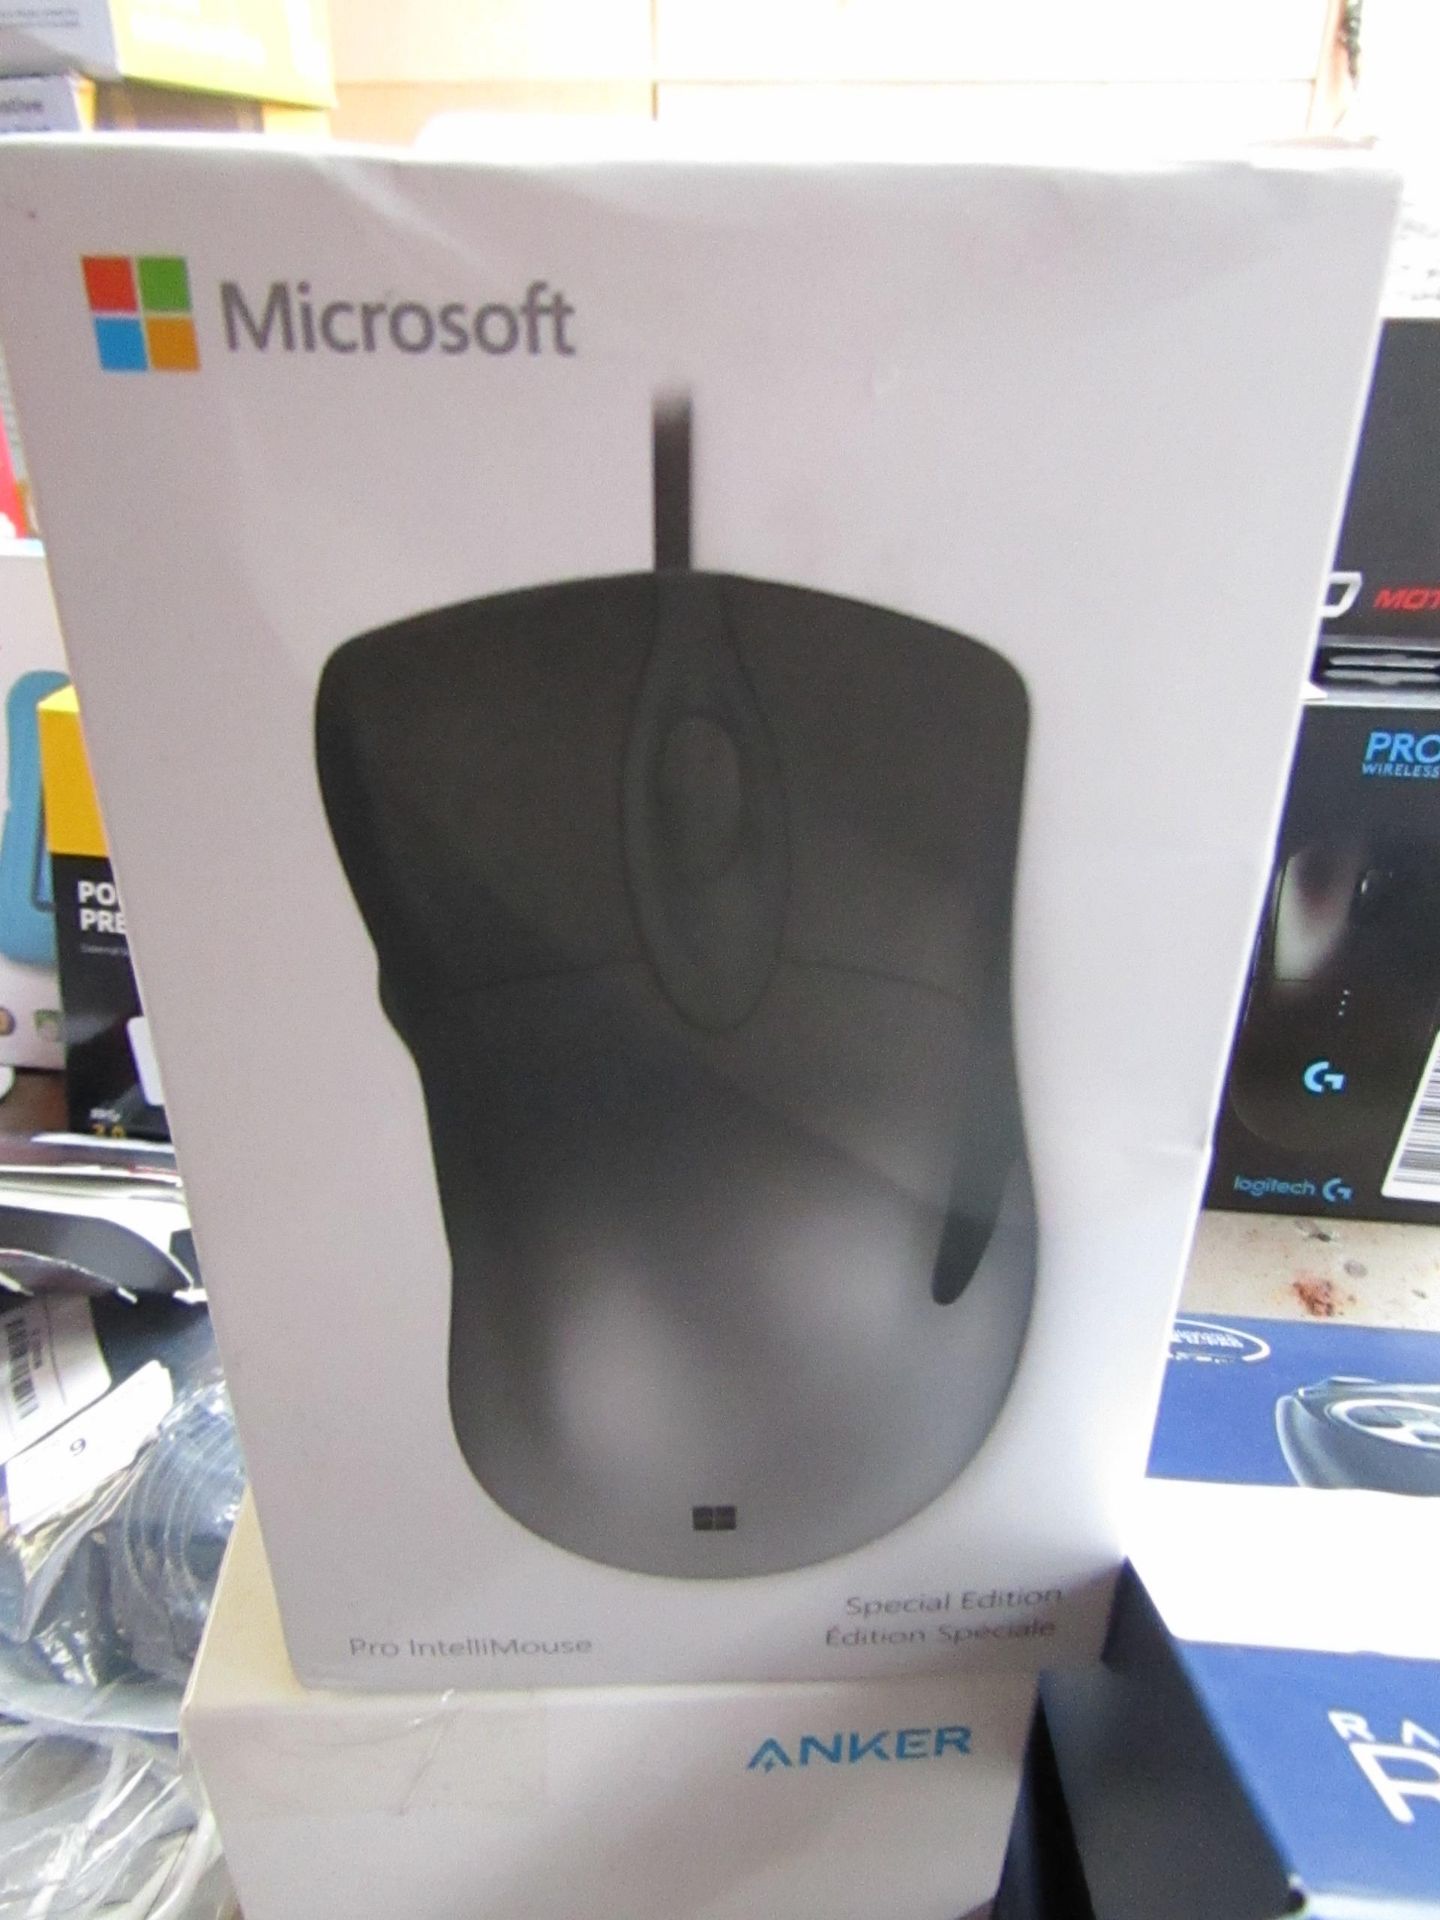 Microsoft Special Edition Pro IntelliMouse, untested and boxed. RRP £60.00